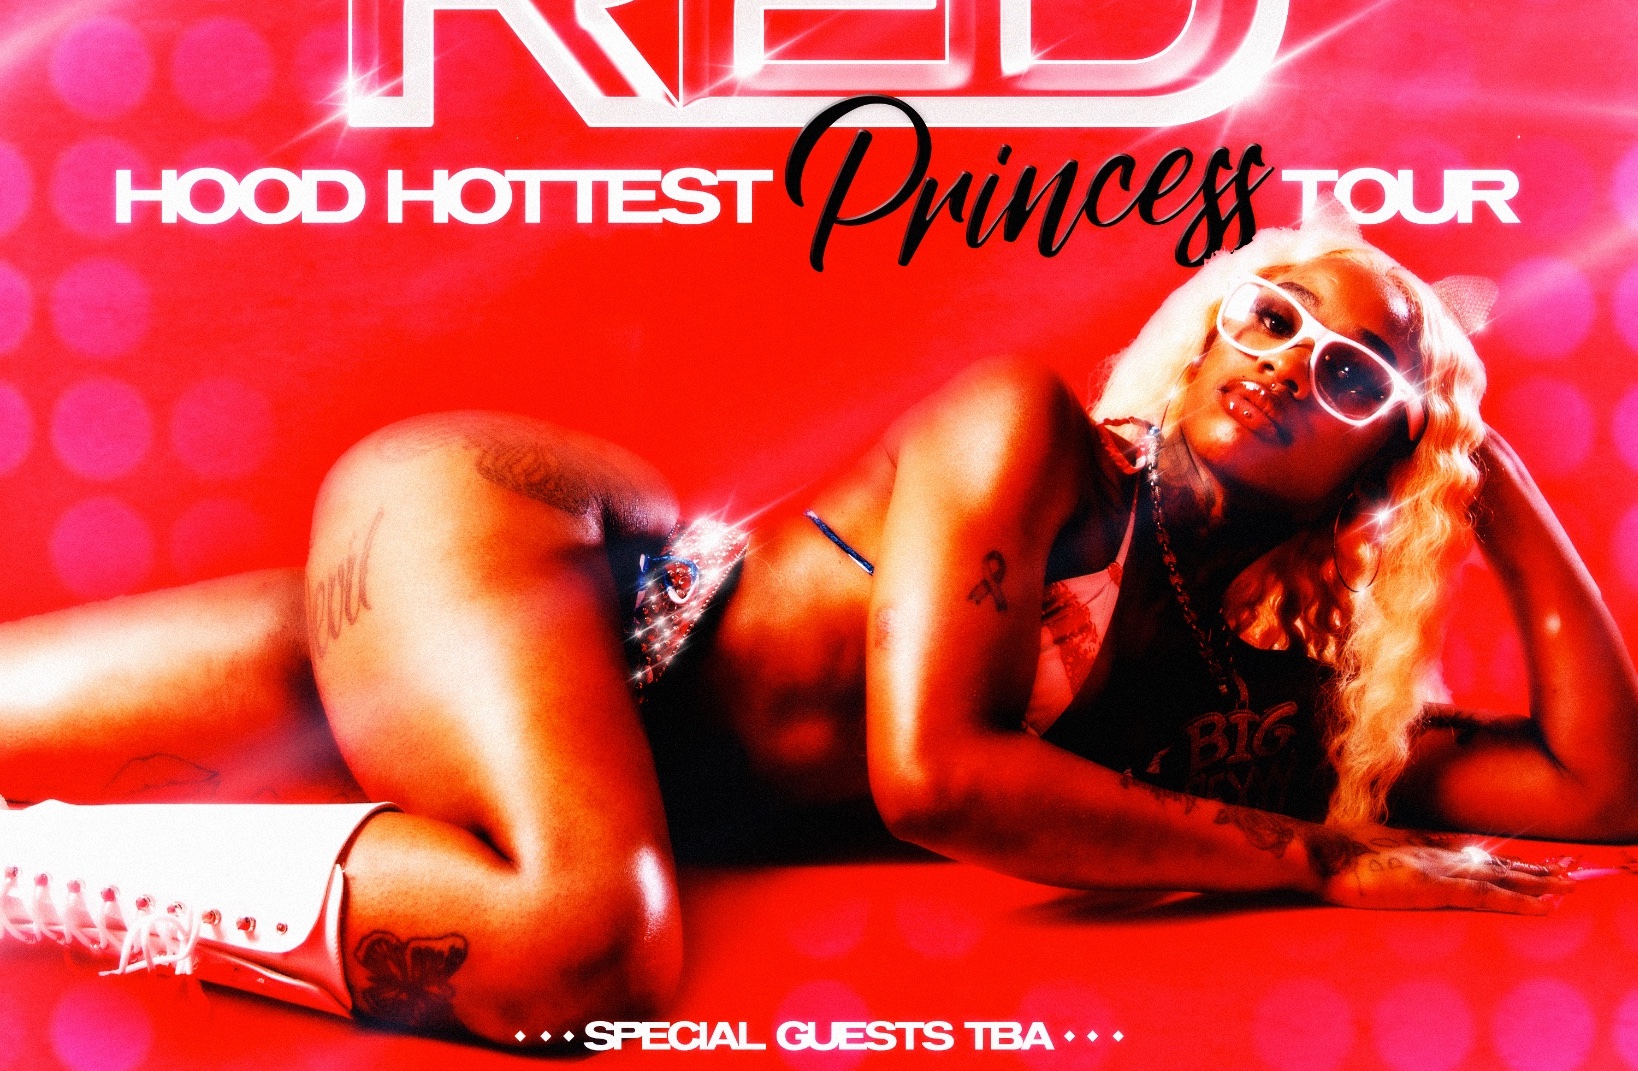 Sexyy Red announces 'Hood Hottest Princess' tour #SexyyRed